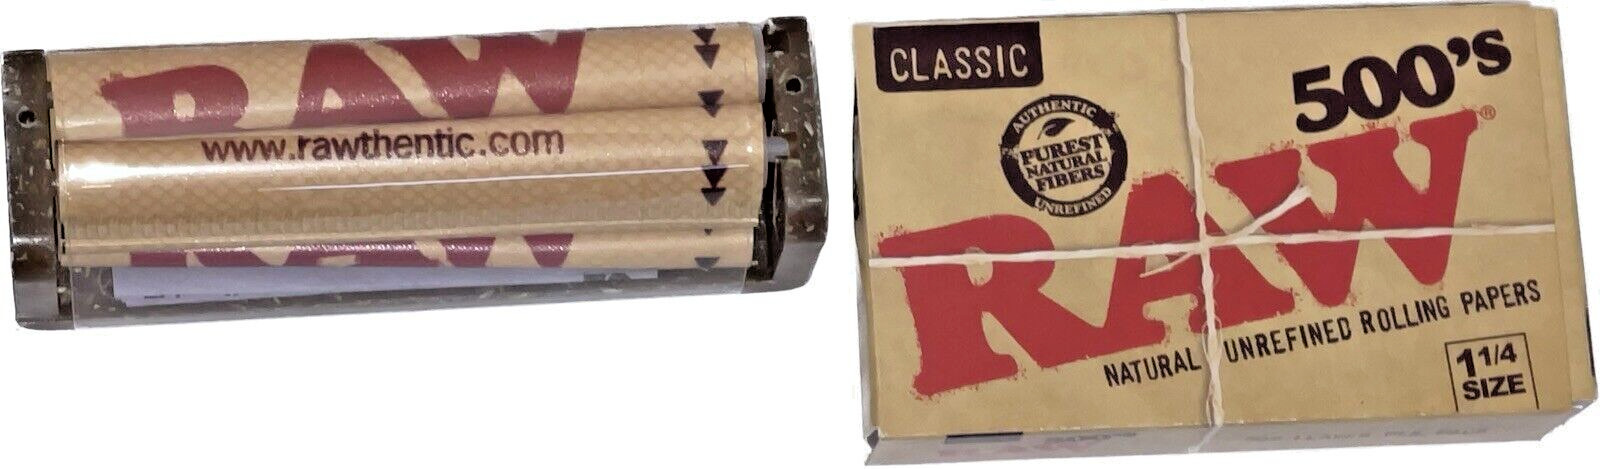 Raw Classic 500 Pack Cigarette Rolling Papers And 1 1/4”Roller **Free Shipping**